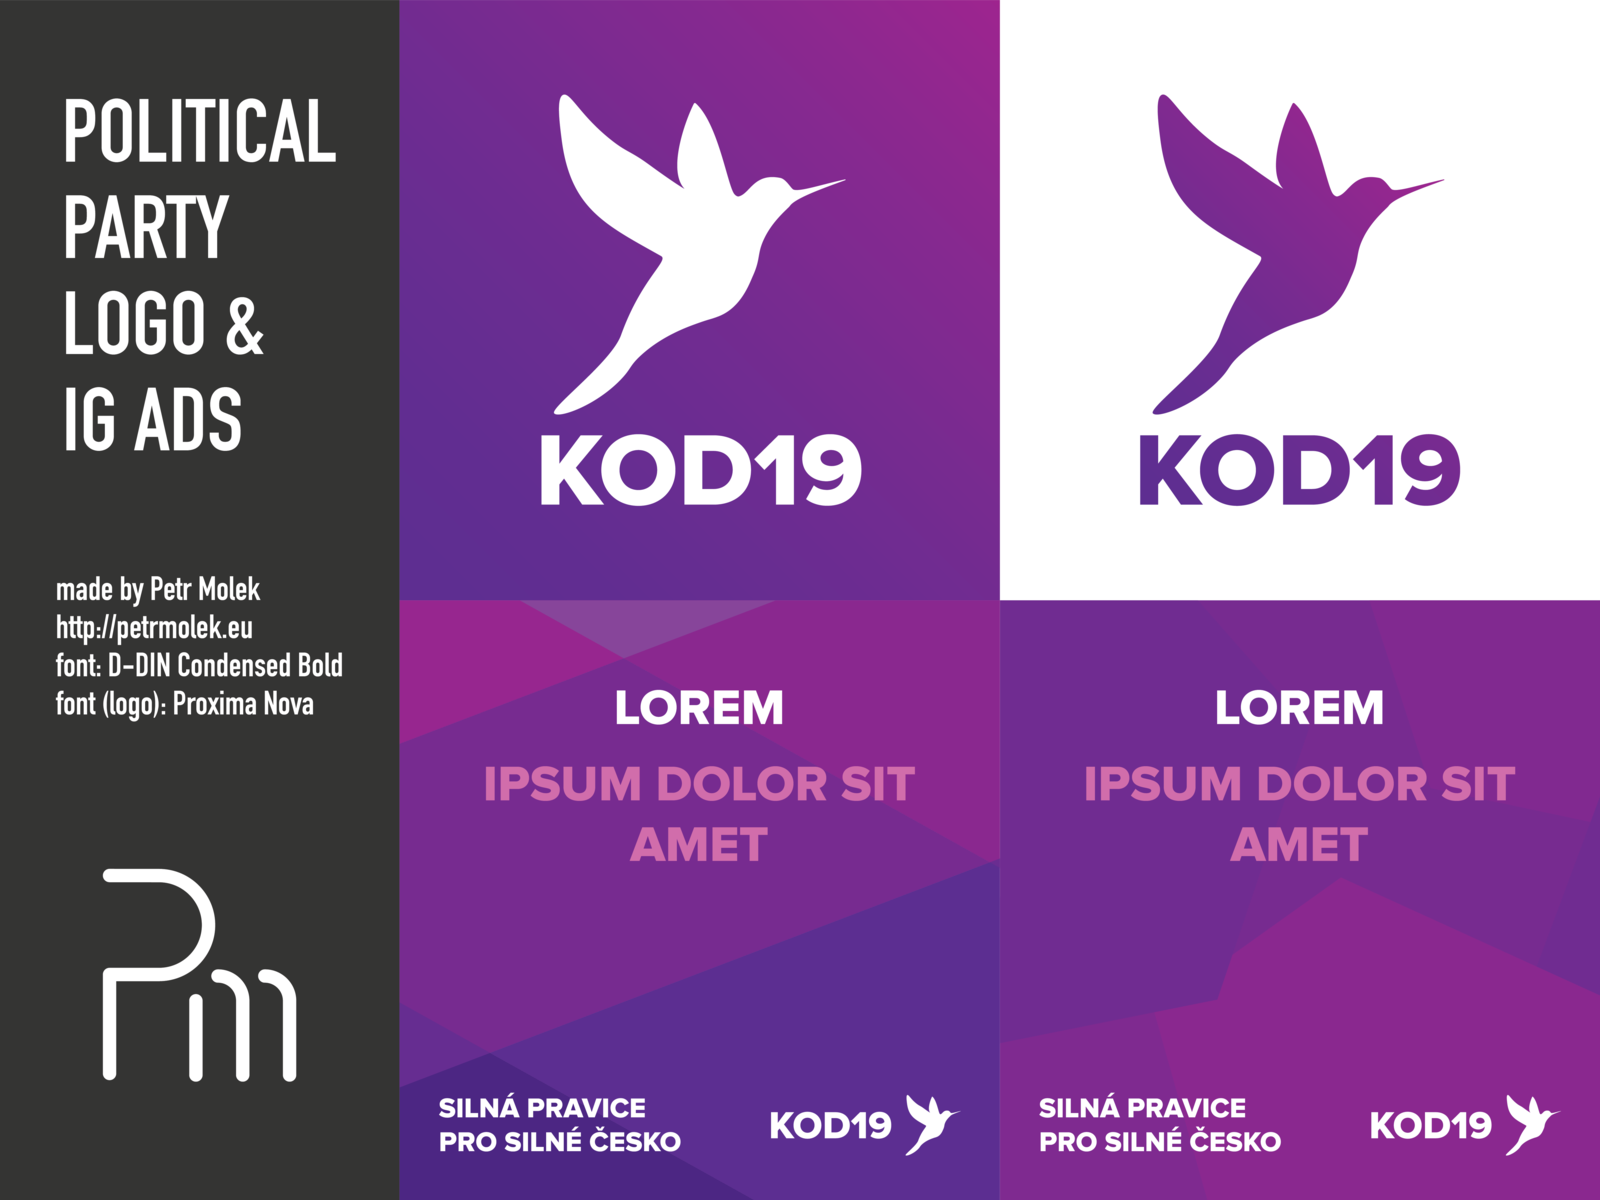 Political Party Logo & Instagram Ads by Petr Molek on Dribbble